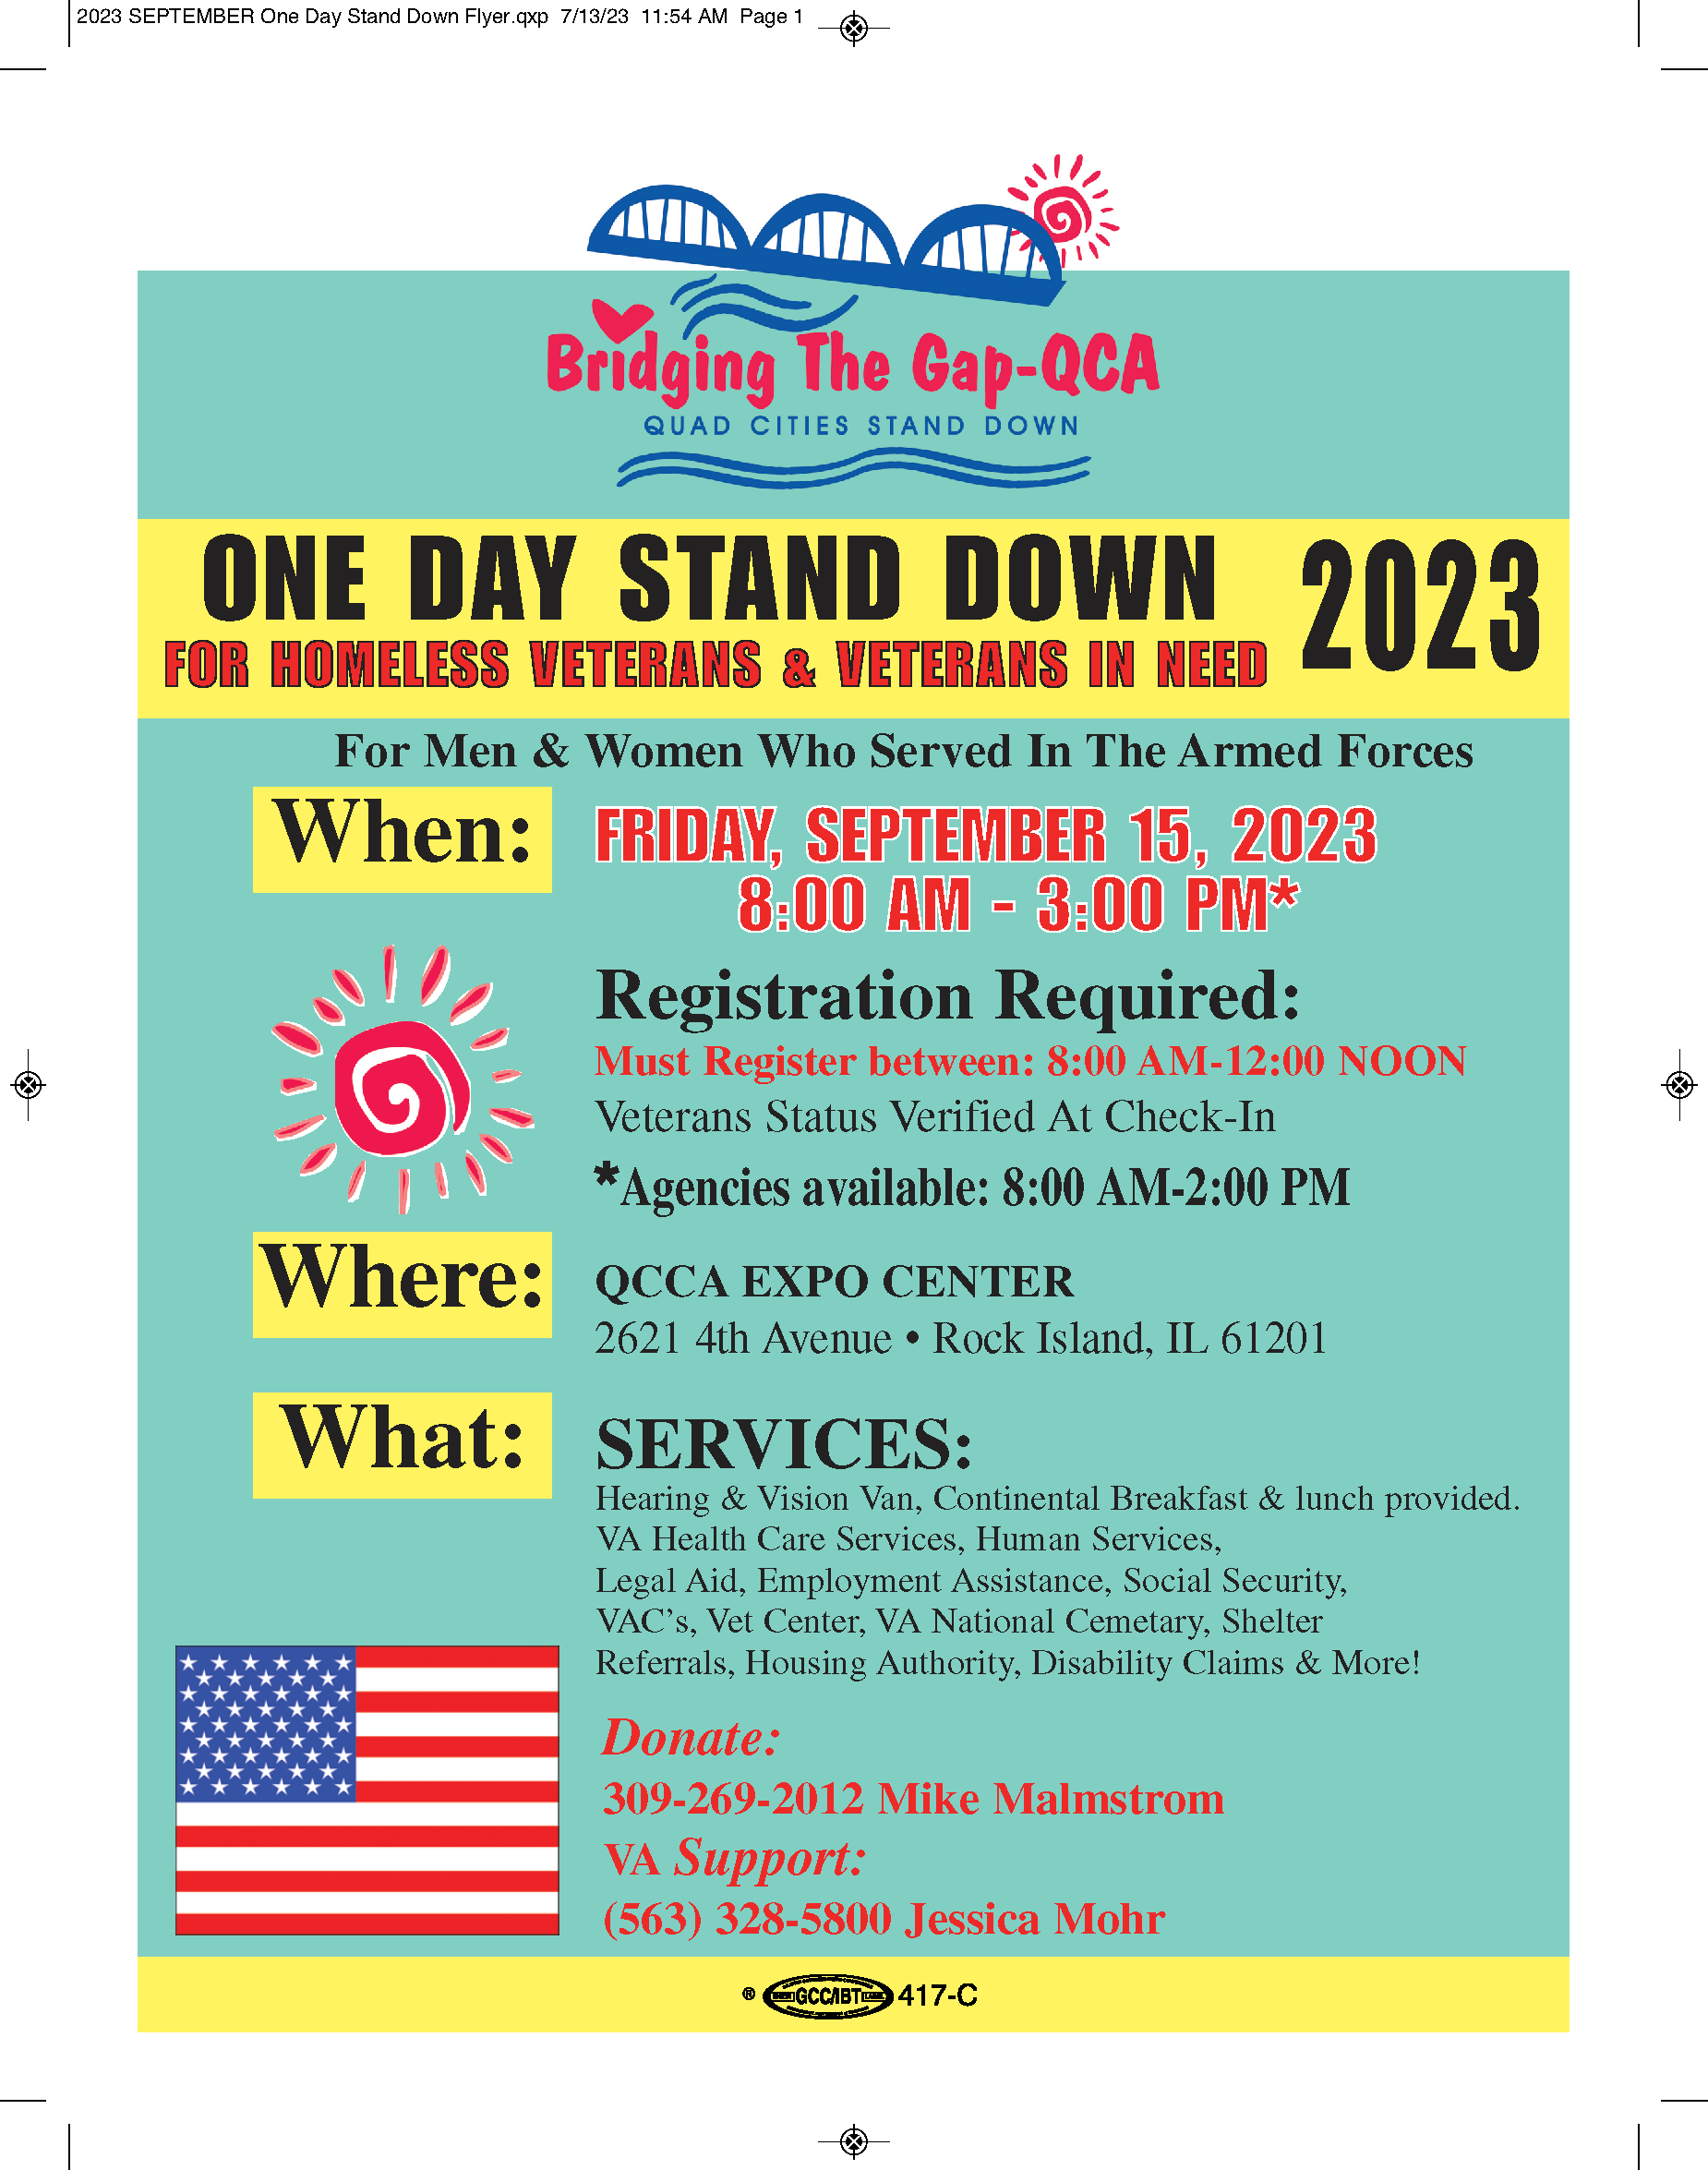 2023 One Day Stand Down Flier